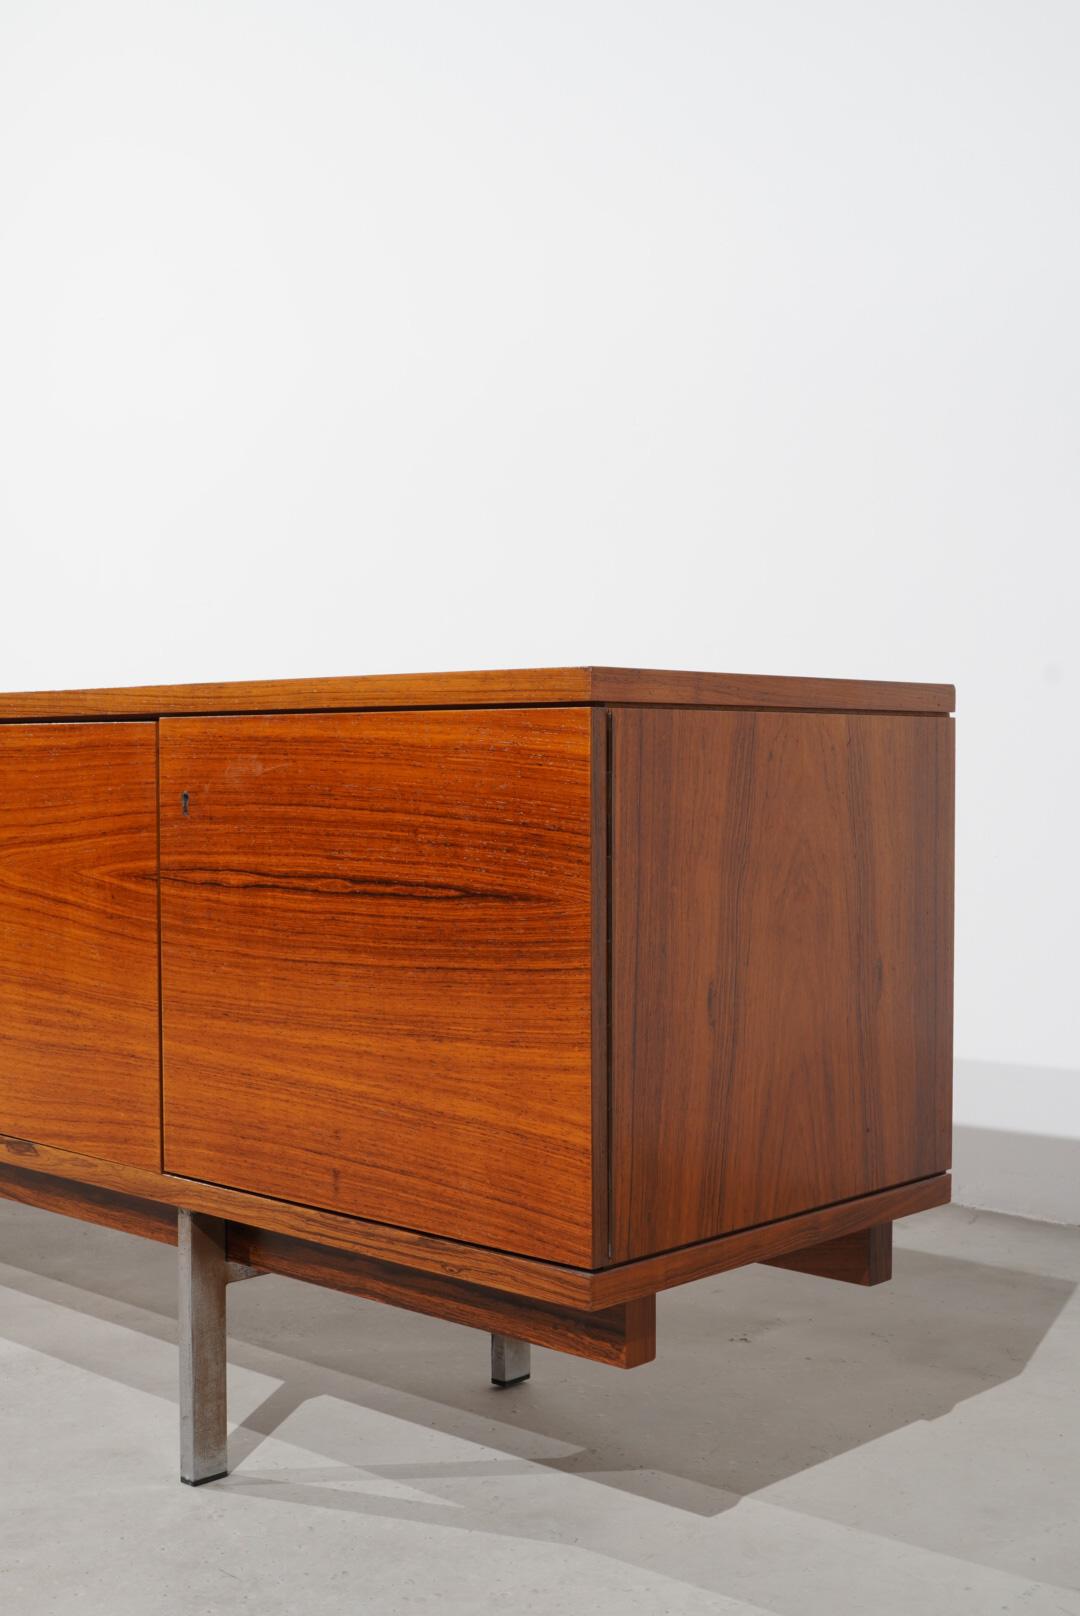 Exceptionally big and well designed sideboard by Helmut Magg. Beautiful piece built in the Mid-1960s.